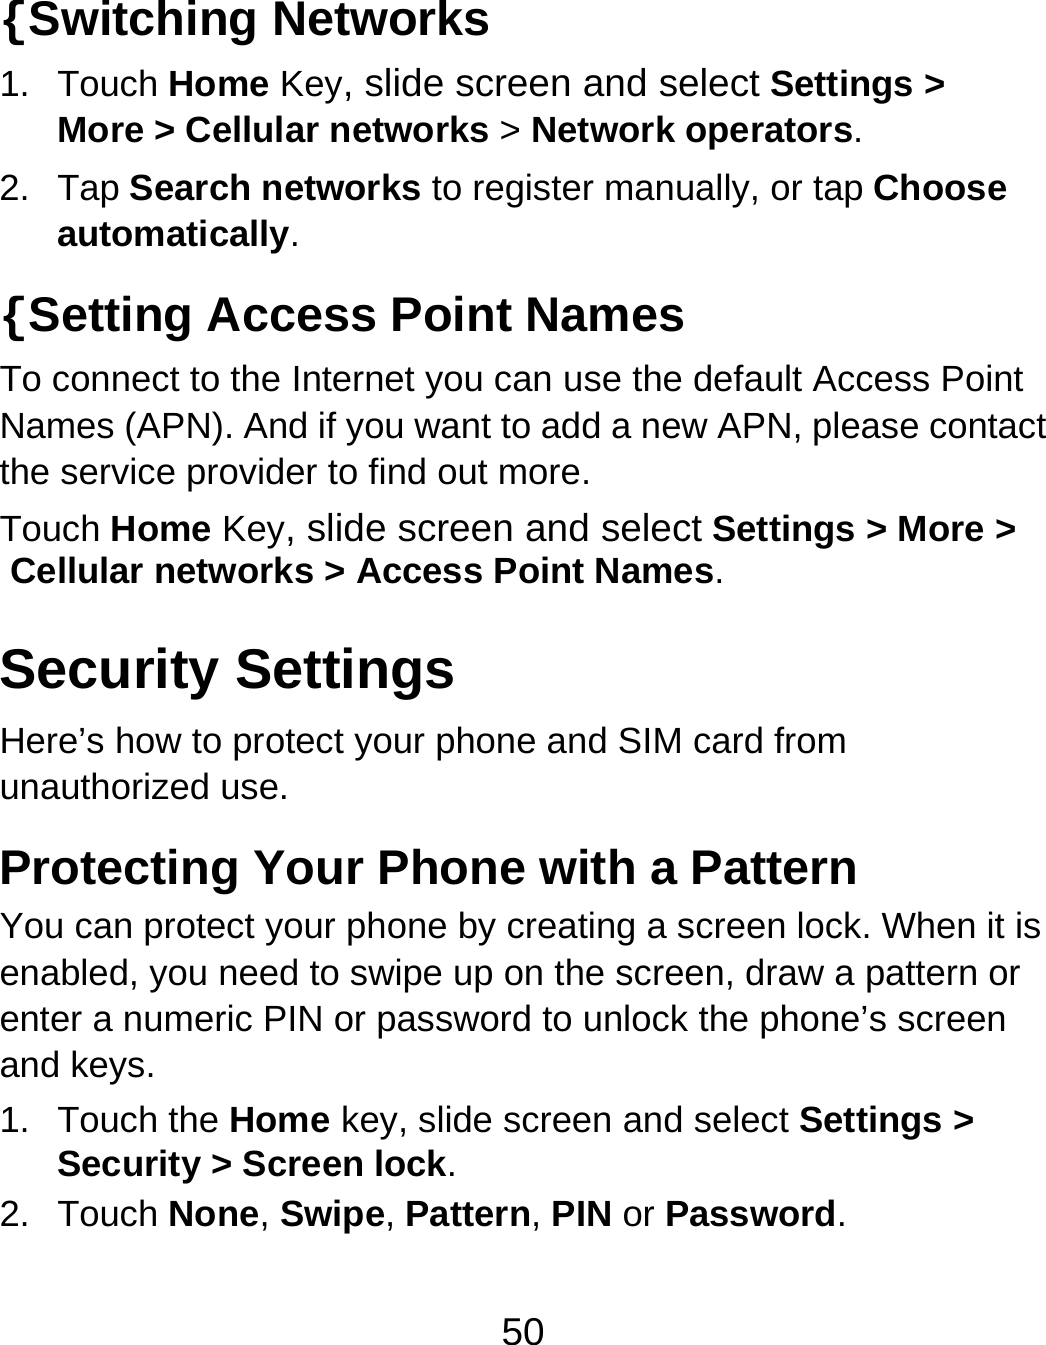 50 {Switching Networks 1. Touch Home Key, slide screen and select Settings &gt; More &gt; Cellular networks &gt; Network operators.  2. Tap Search networks to register manually, or tap Choose automatically. {Setting Access Point Names To connect to the Internet you can use the default Access Point Names (APN). And if you want to add a new APN, please contact the service provider to find out more. Touch Home Key, slide screen and select Settings &gt; More &gt; Cellular networks &gt; Access Point Names. Security Settings Here’s how to protect your phone and SIM card from unauthorized use.   Protecting Your Phone with a Pattern You can protect your phone by creating a screen lock. When it is enabled, you need to swipe up on the screen, draw a pattern or enter a numeric PIN or password to unlock the phone’s screen and keys. 1. Touch the Home key, slide screen and select Settings &gt; Security &gt; Screen lock. 2. Touch None, Swipe, Pattern, PIN or Password. 